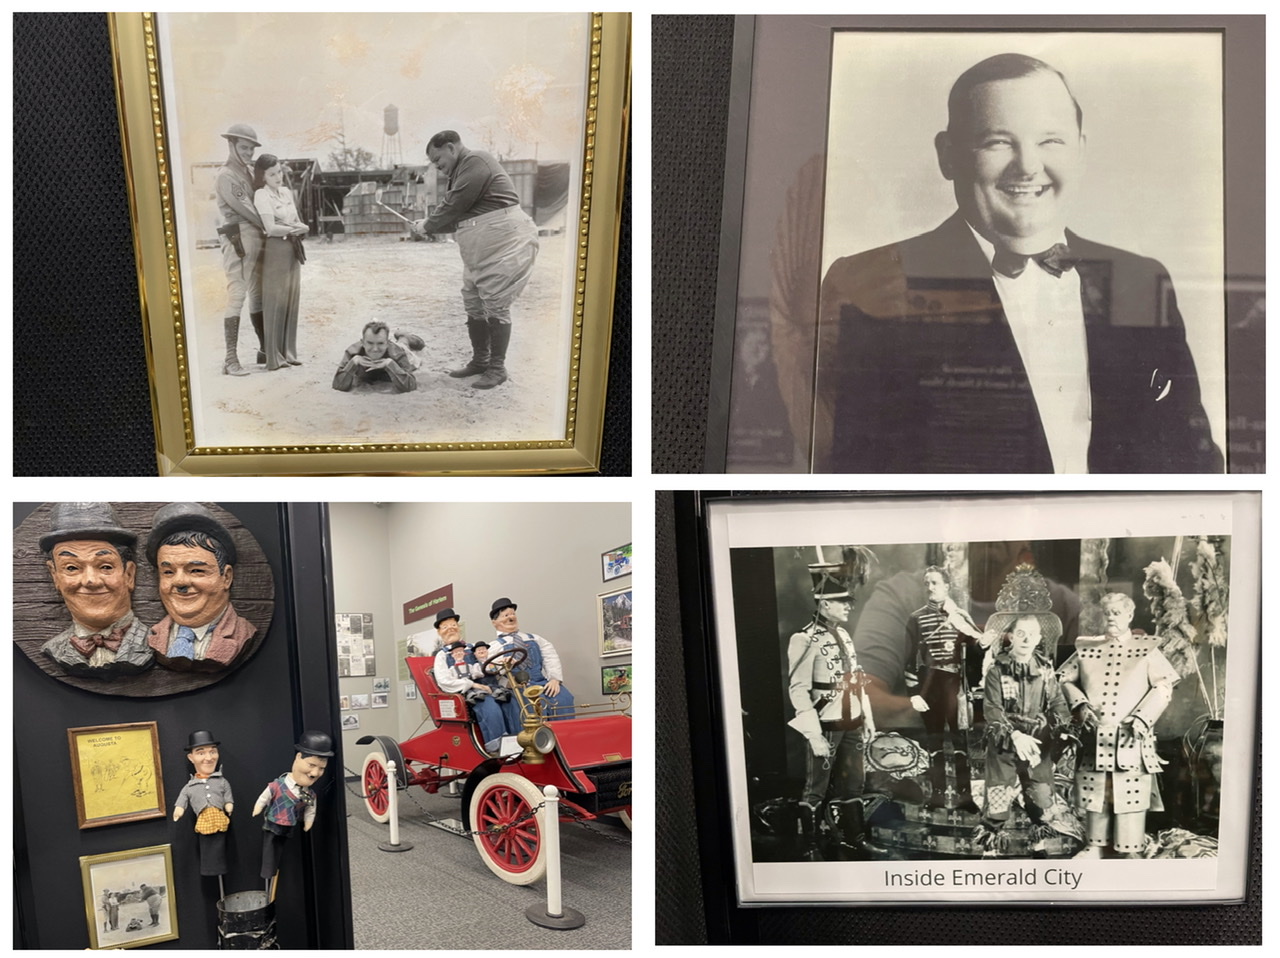 Collage of photos taken at the Laurel & Hardy Museum, Harlem, Georgia.  Photos taken by and the property of FourWalls.